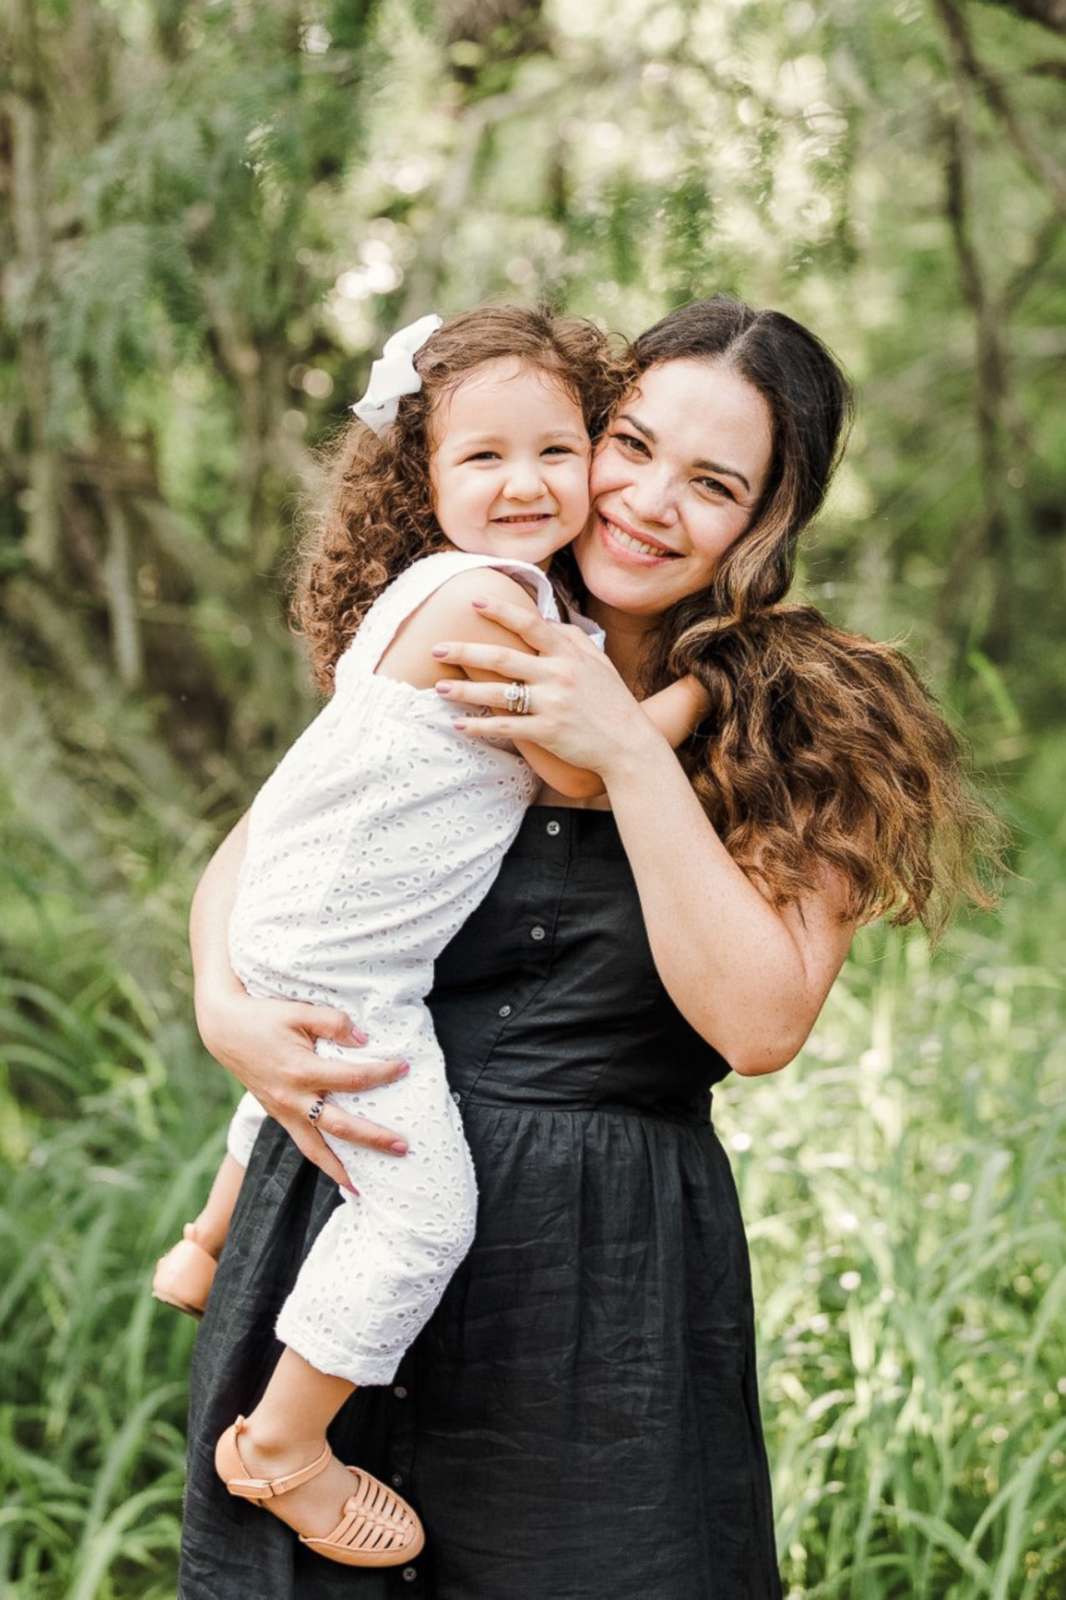 PHOTO: Dr. Keila Rodriguez, a pediatrician in Texas, in an undated photo with her 3-year-old daughter.